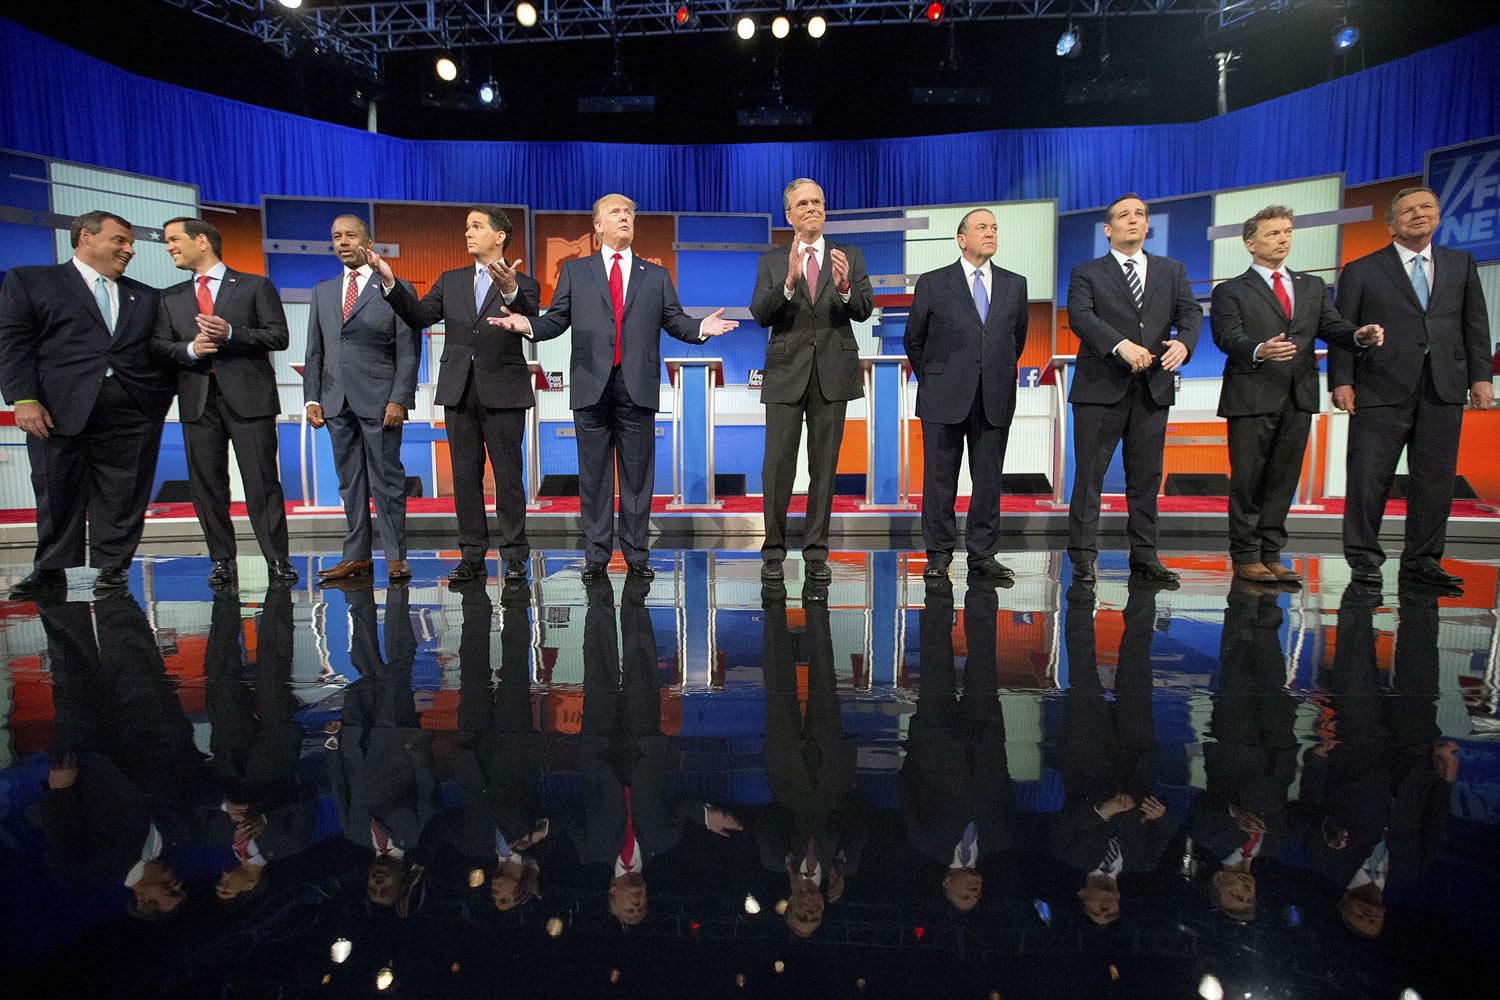 Republican presidential candidates from left, Chris Christie, Marco Rubio, Ben Carson, Scott Walker, Donald Trump, Jeb Bush, Mike Huckabee, Ted Cruz, Rand Paul, and John Kasich take the stage Thursday in Cleveland.